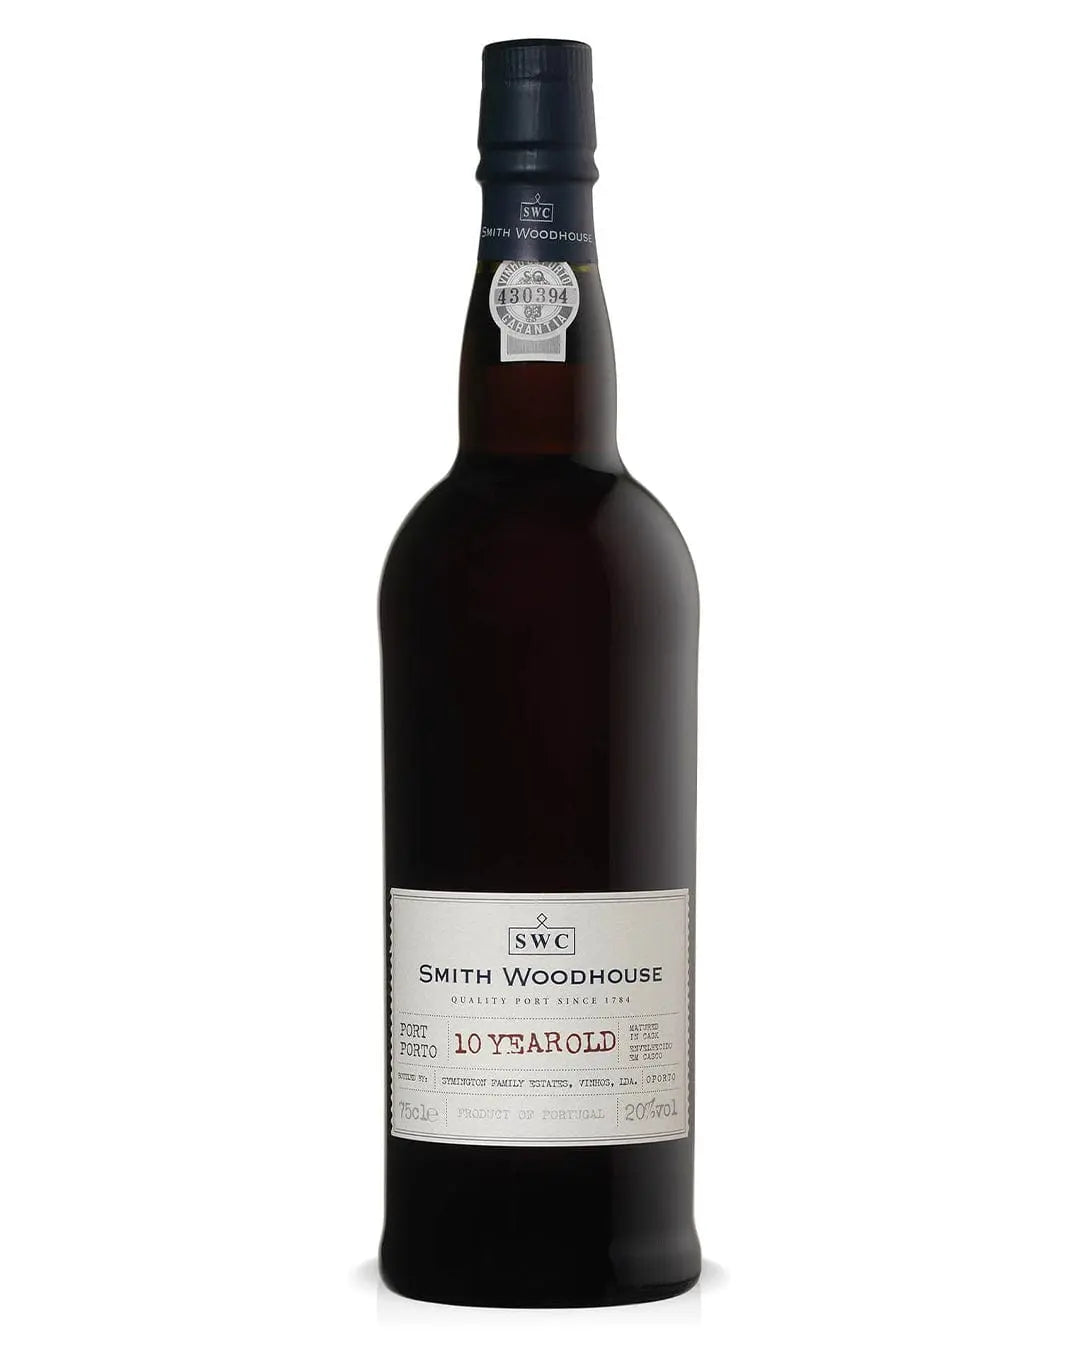 Smith Woodhouse 10 year old Tawny Port, 75 cl Fortified & Other Wines